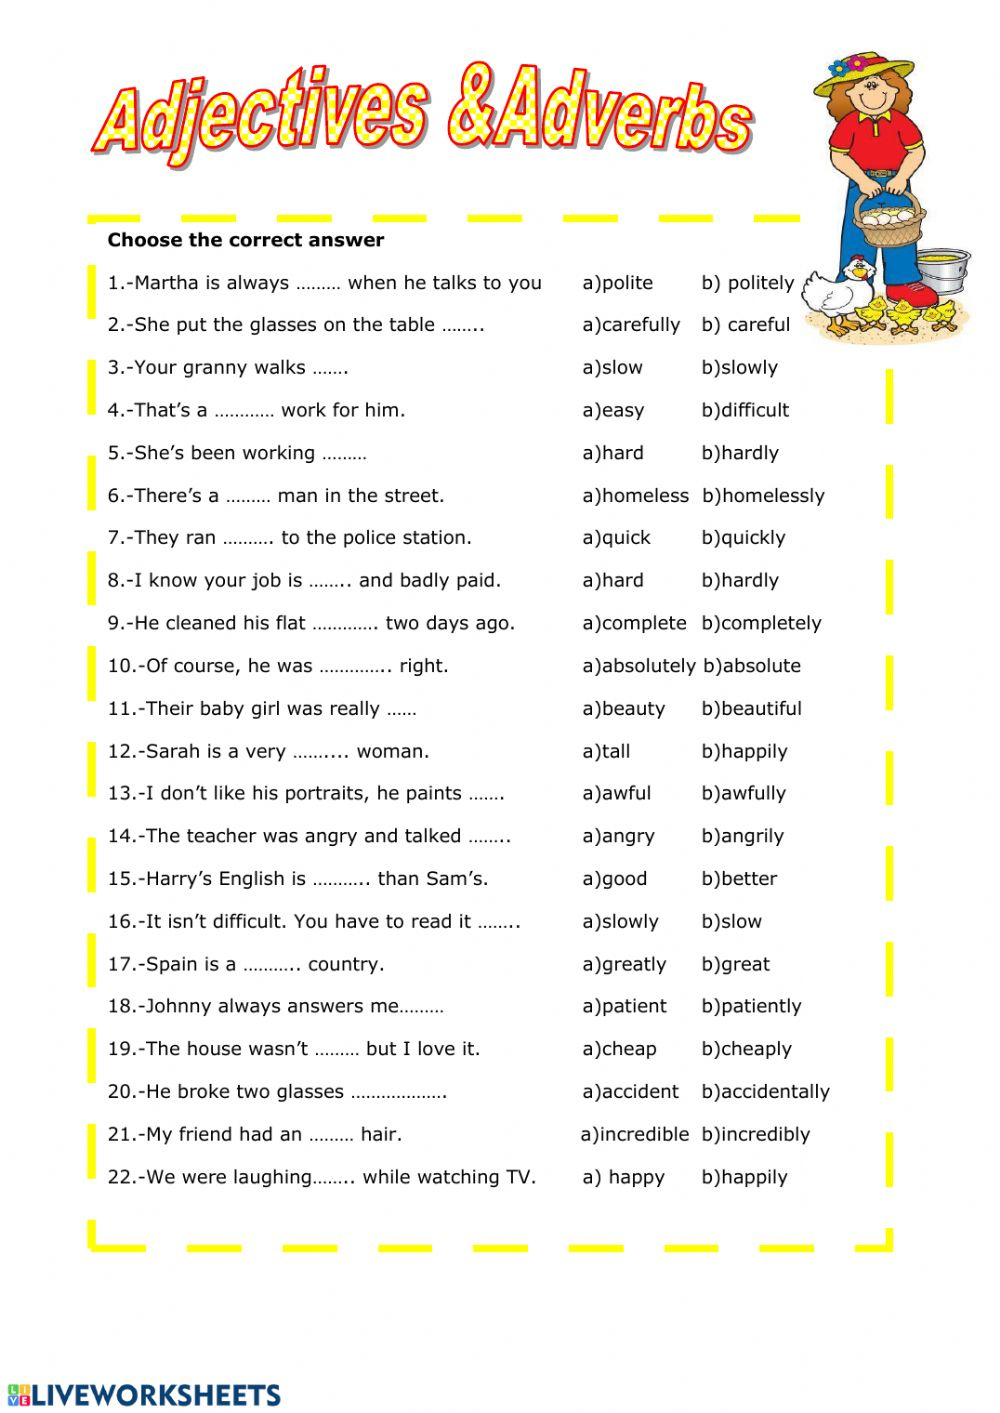 adverbs-modifying-adjectives-worksheet-with-answers-adverbworksheets